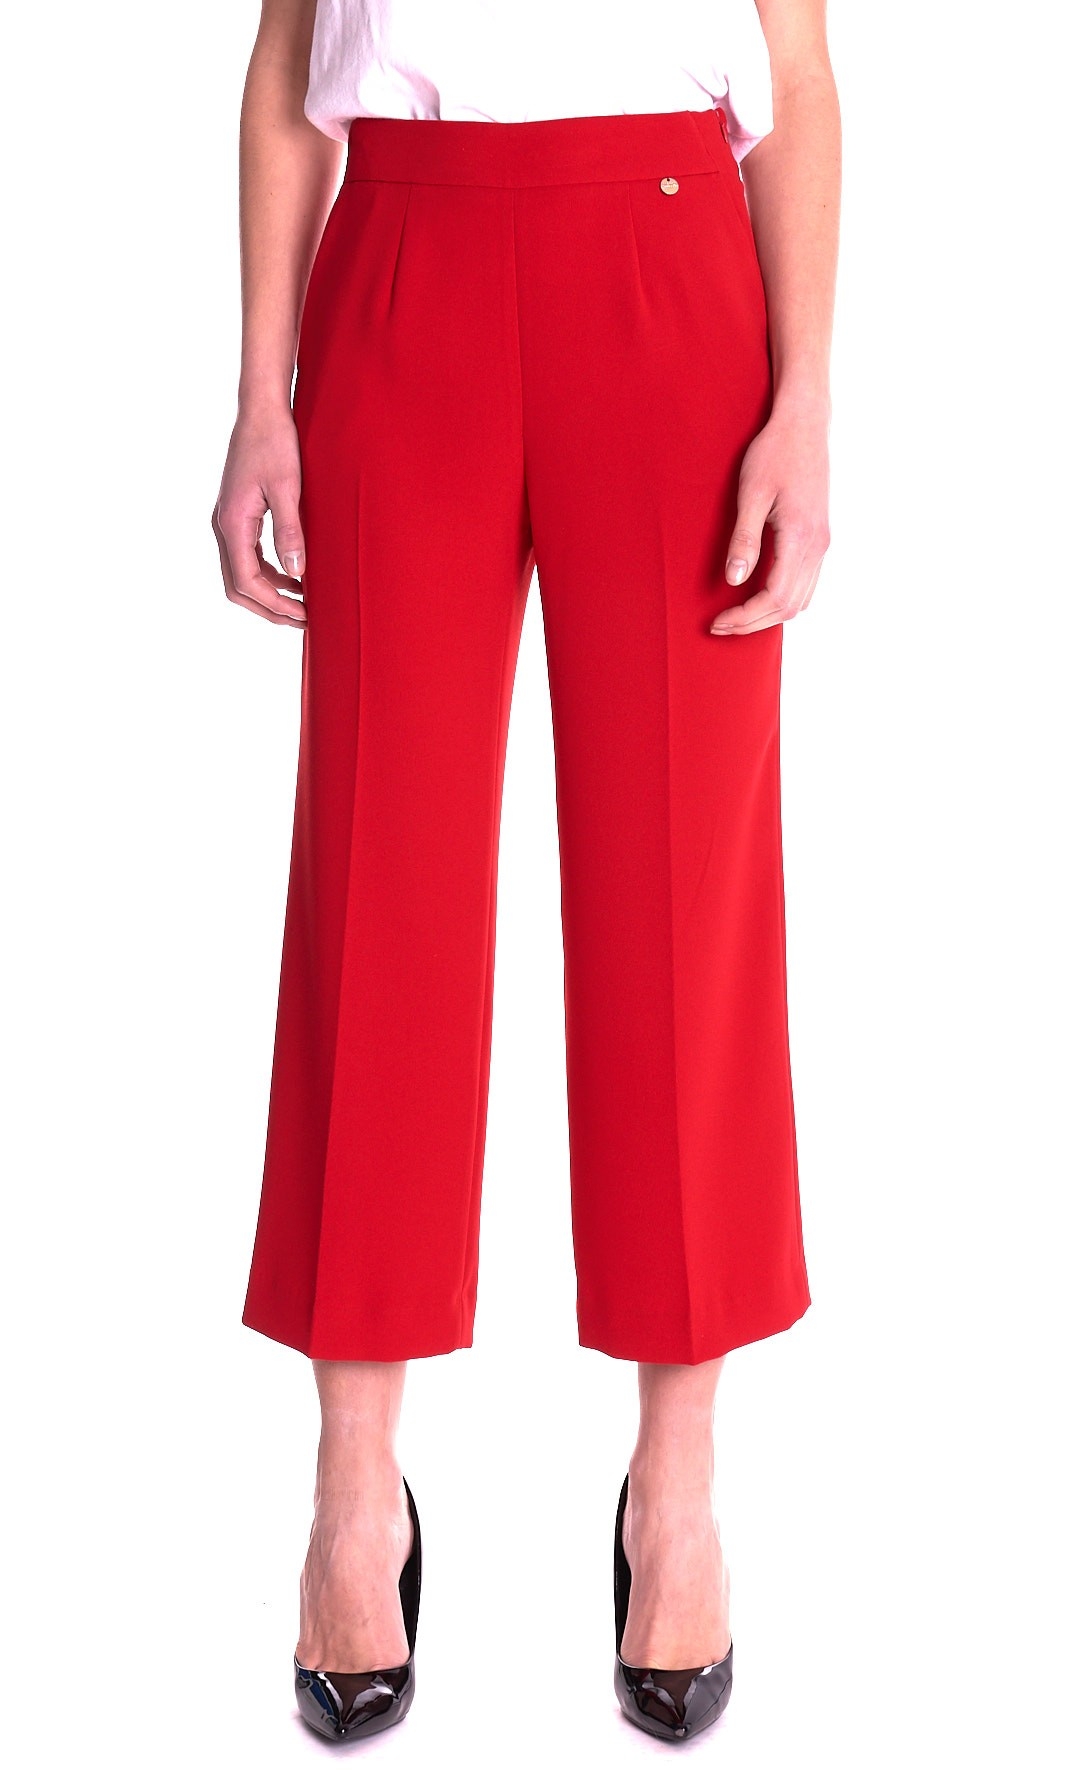 PANTALONE LUCKYLU CROPPED AMPIO IN CADY